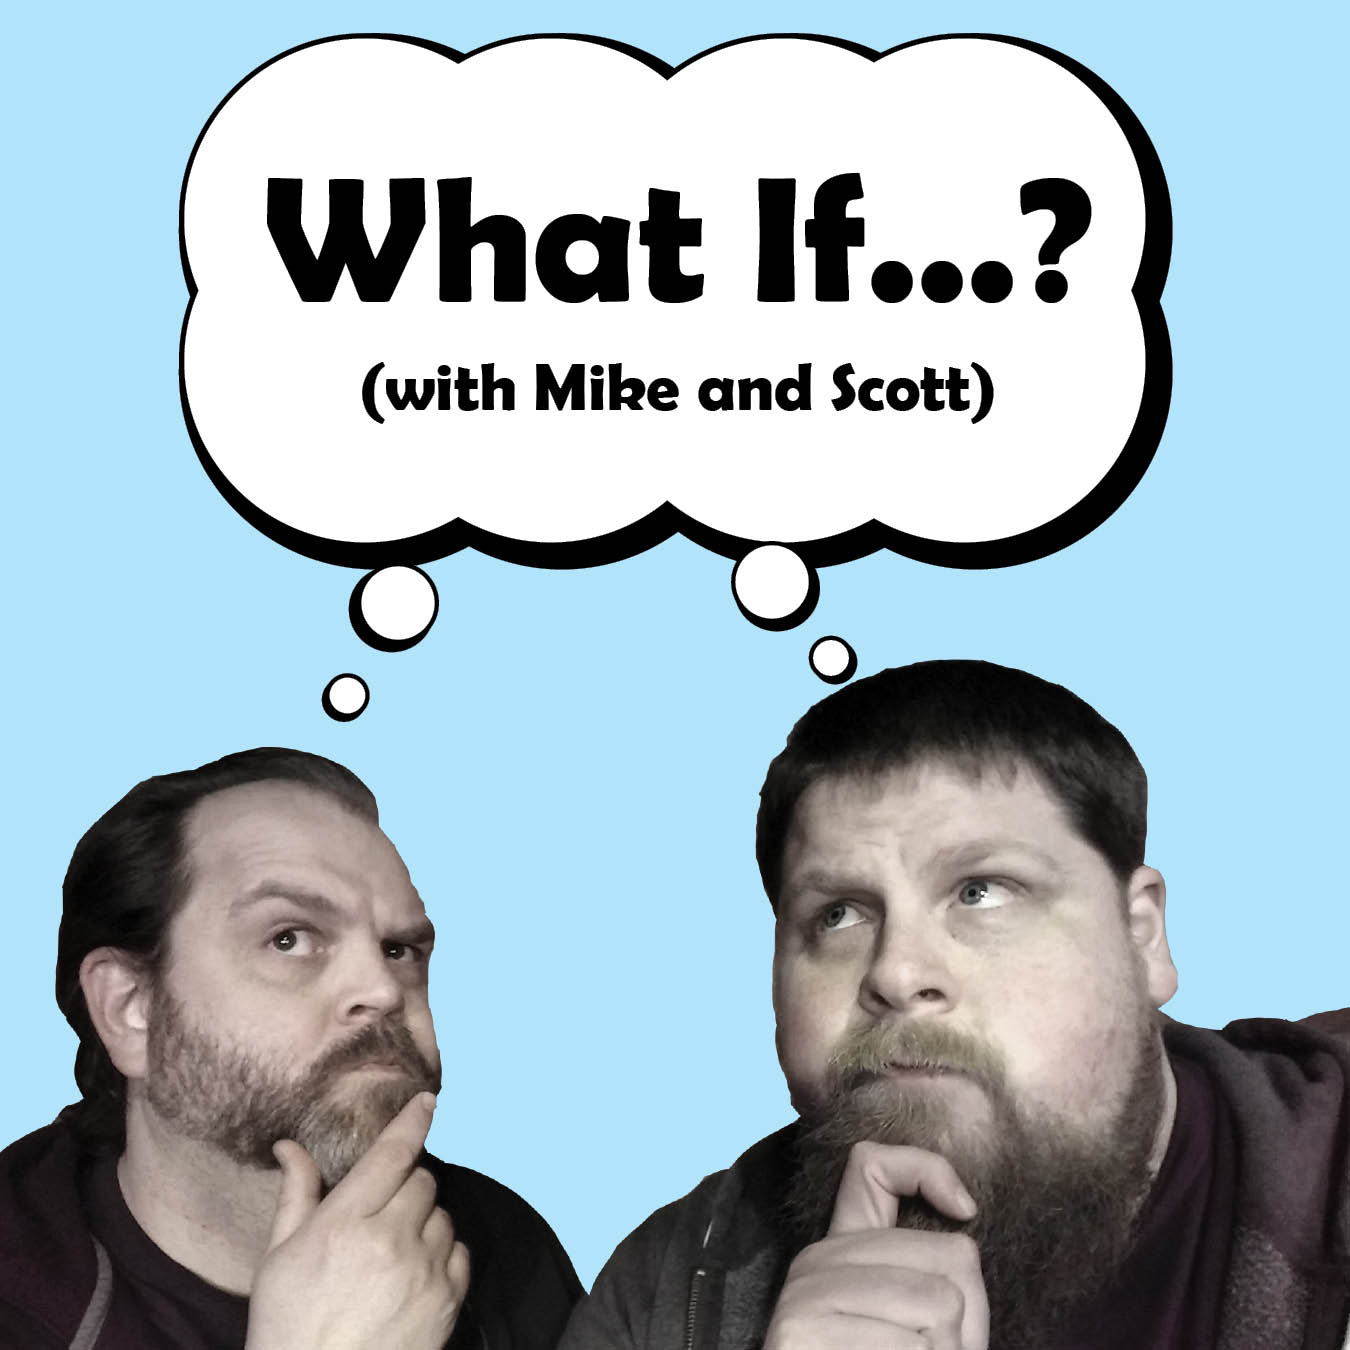 What If - Episode 002 (Airplanes)